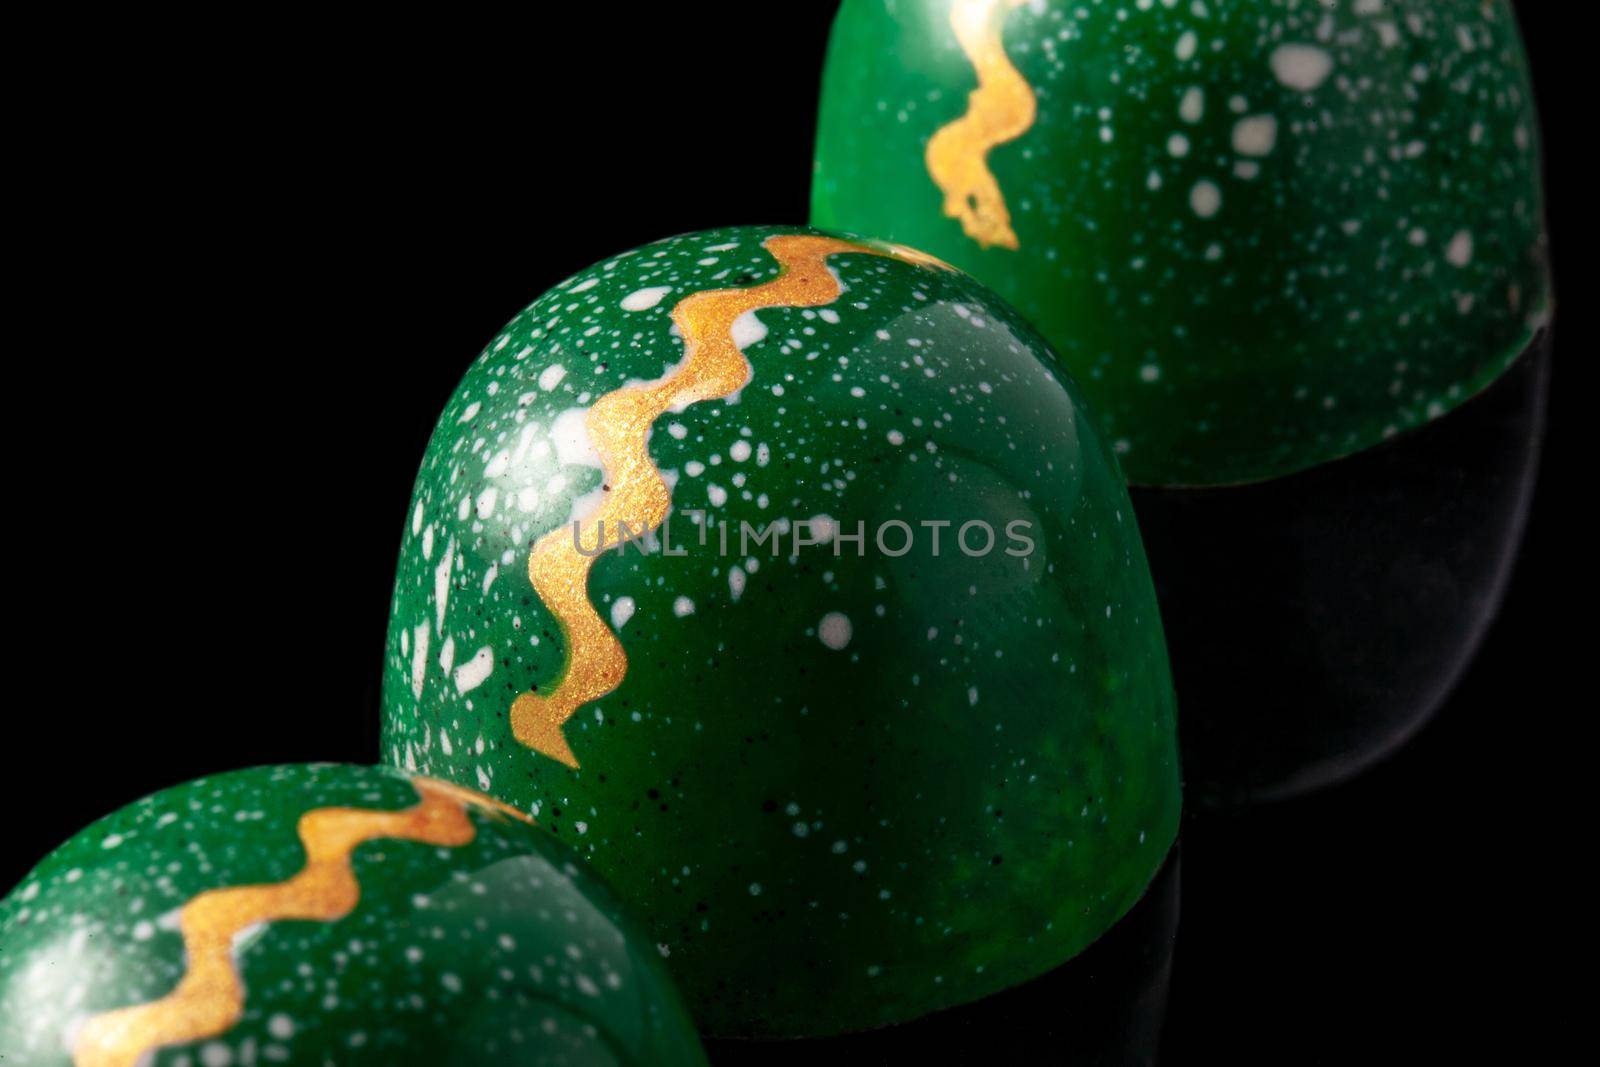 Luxury handmade chocolate candies on black background. Green candies with multicolored drops. Product concept for chocolatier. Close-up by nazarovsergey